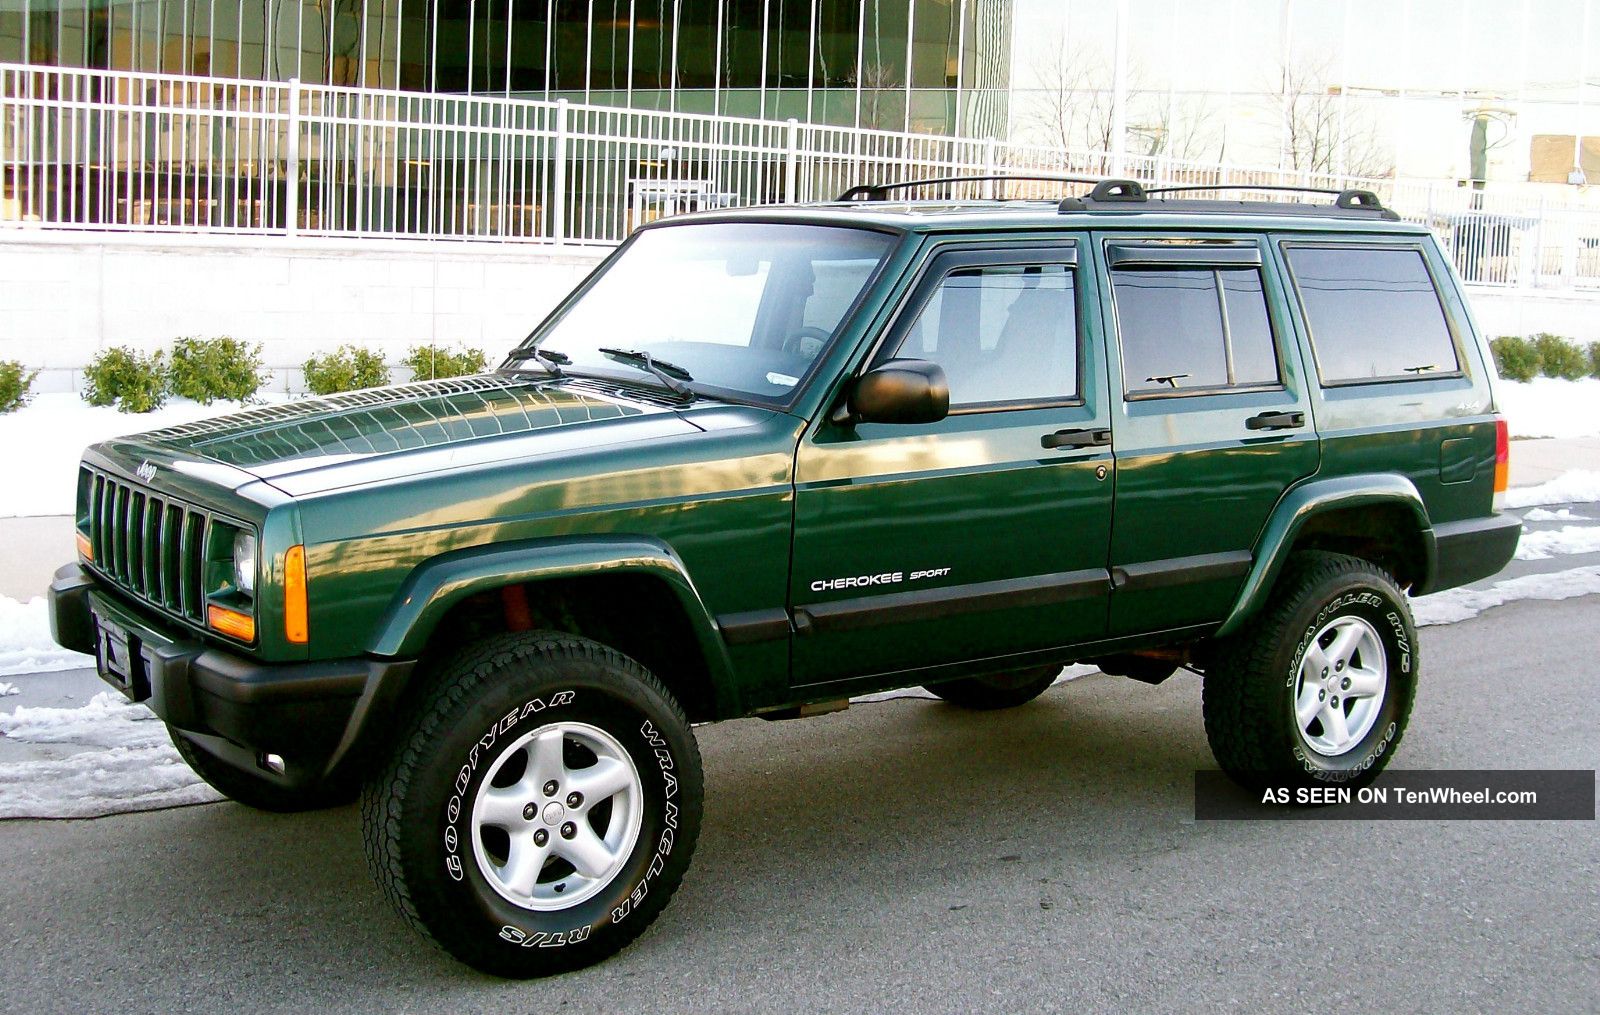 2001 Cherokee jeep lifted picture